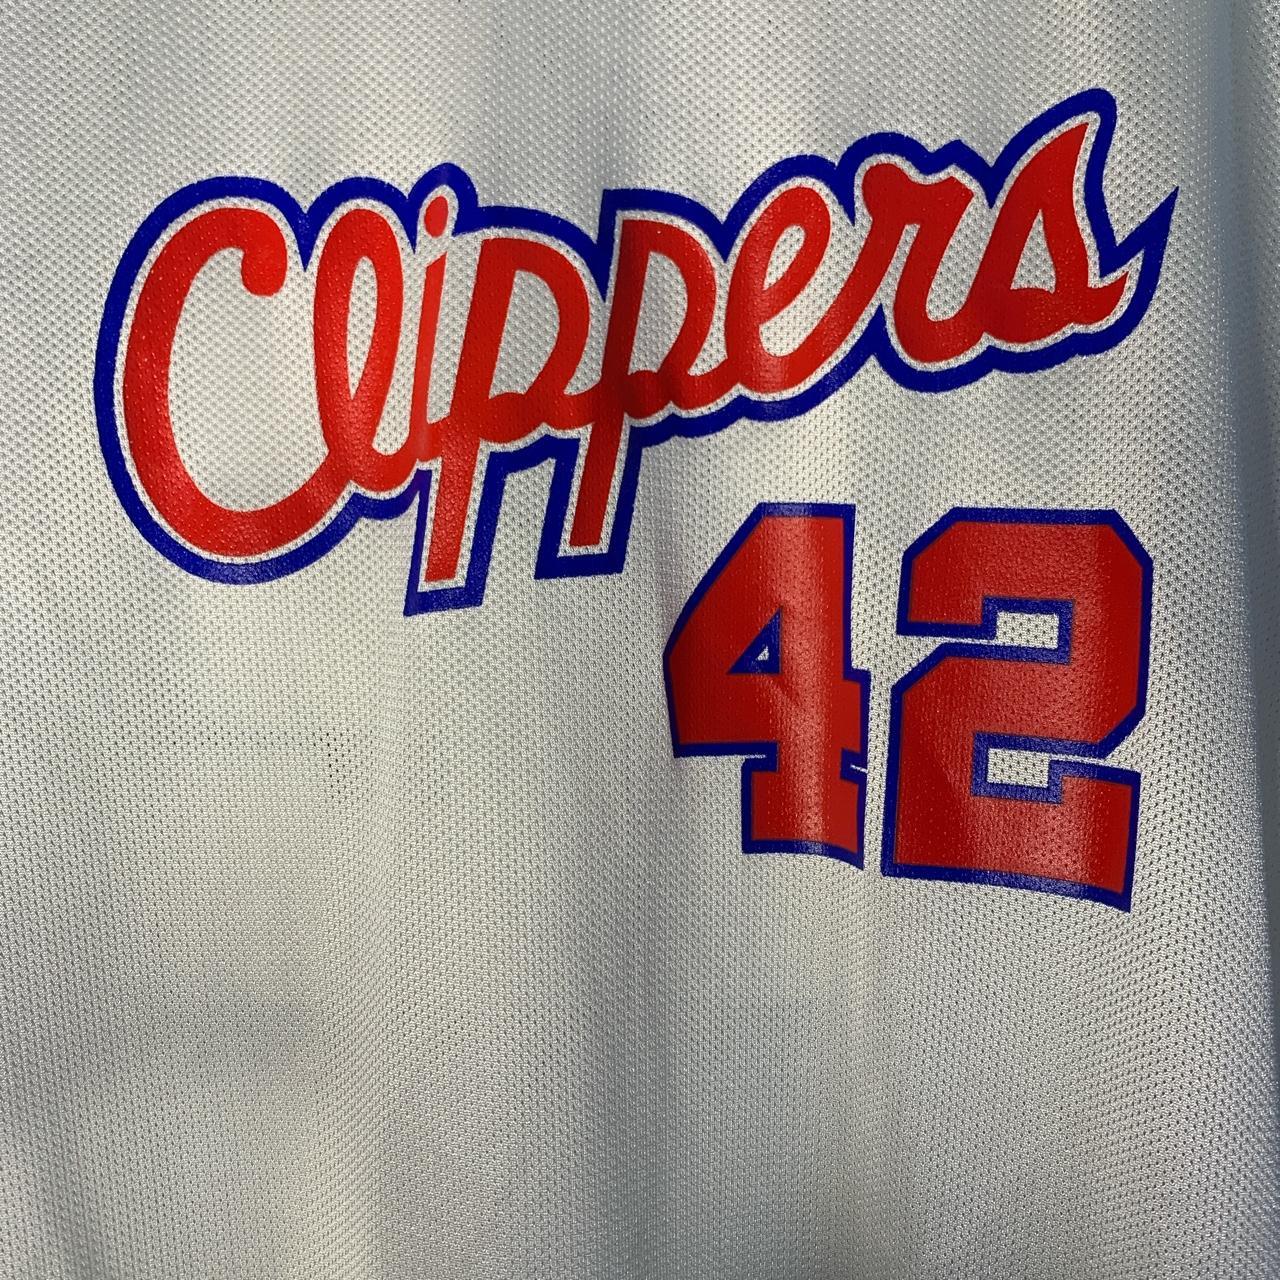 Vintage #42 ELTON BRAND Los Angeles Clippers NBA Nike Jersey L